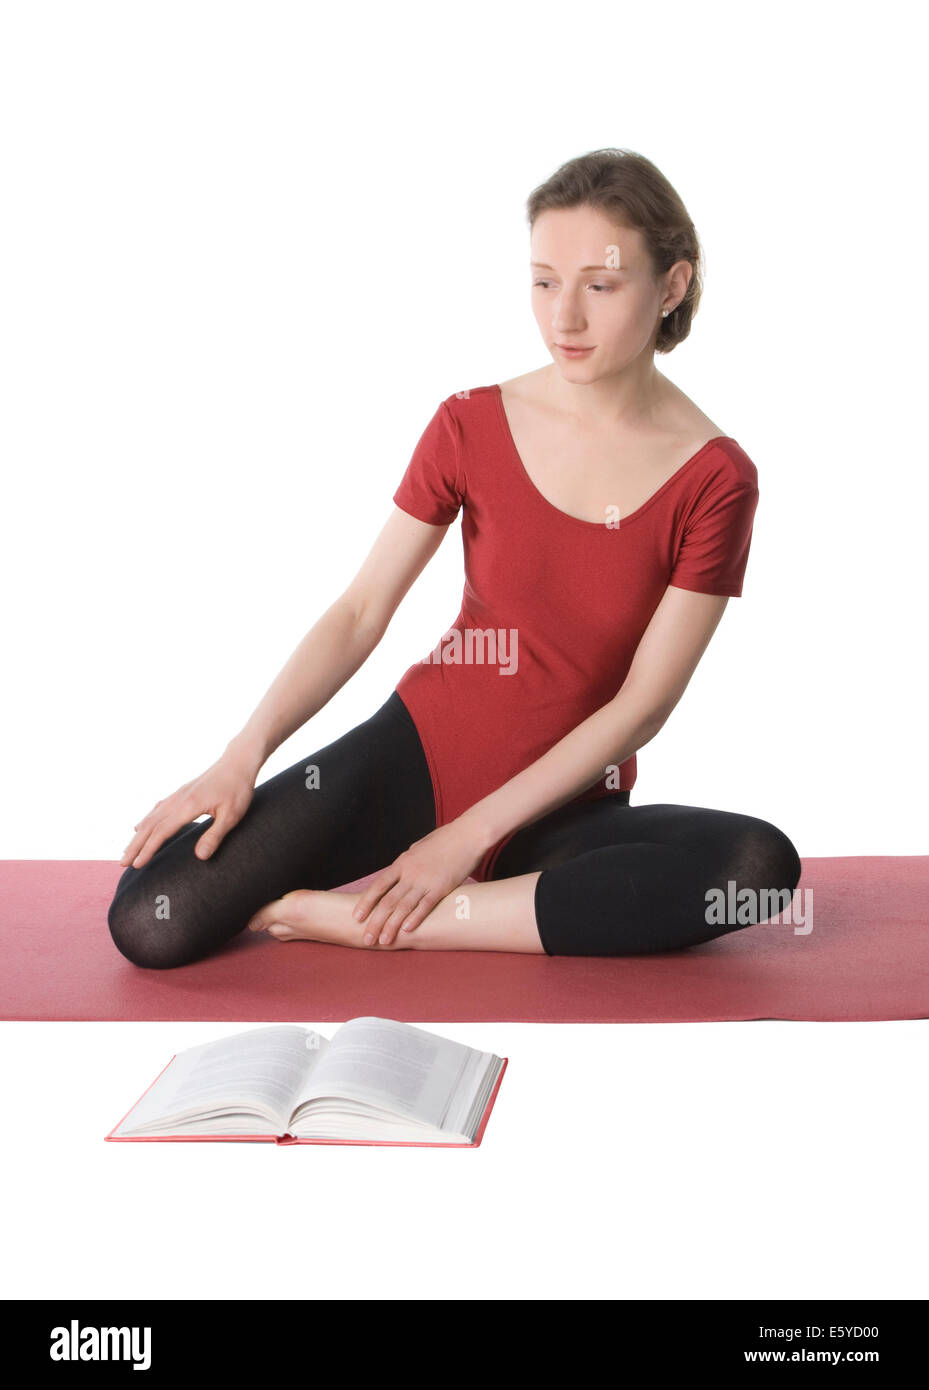 Young woman in sports clothes reading a book Stock Photo